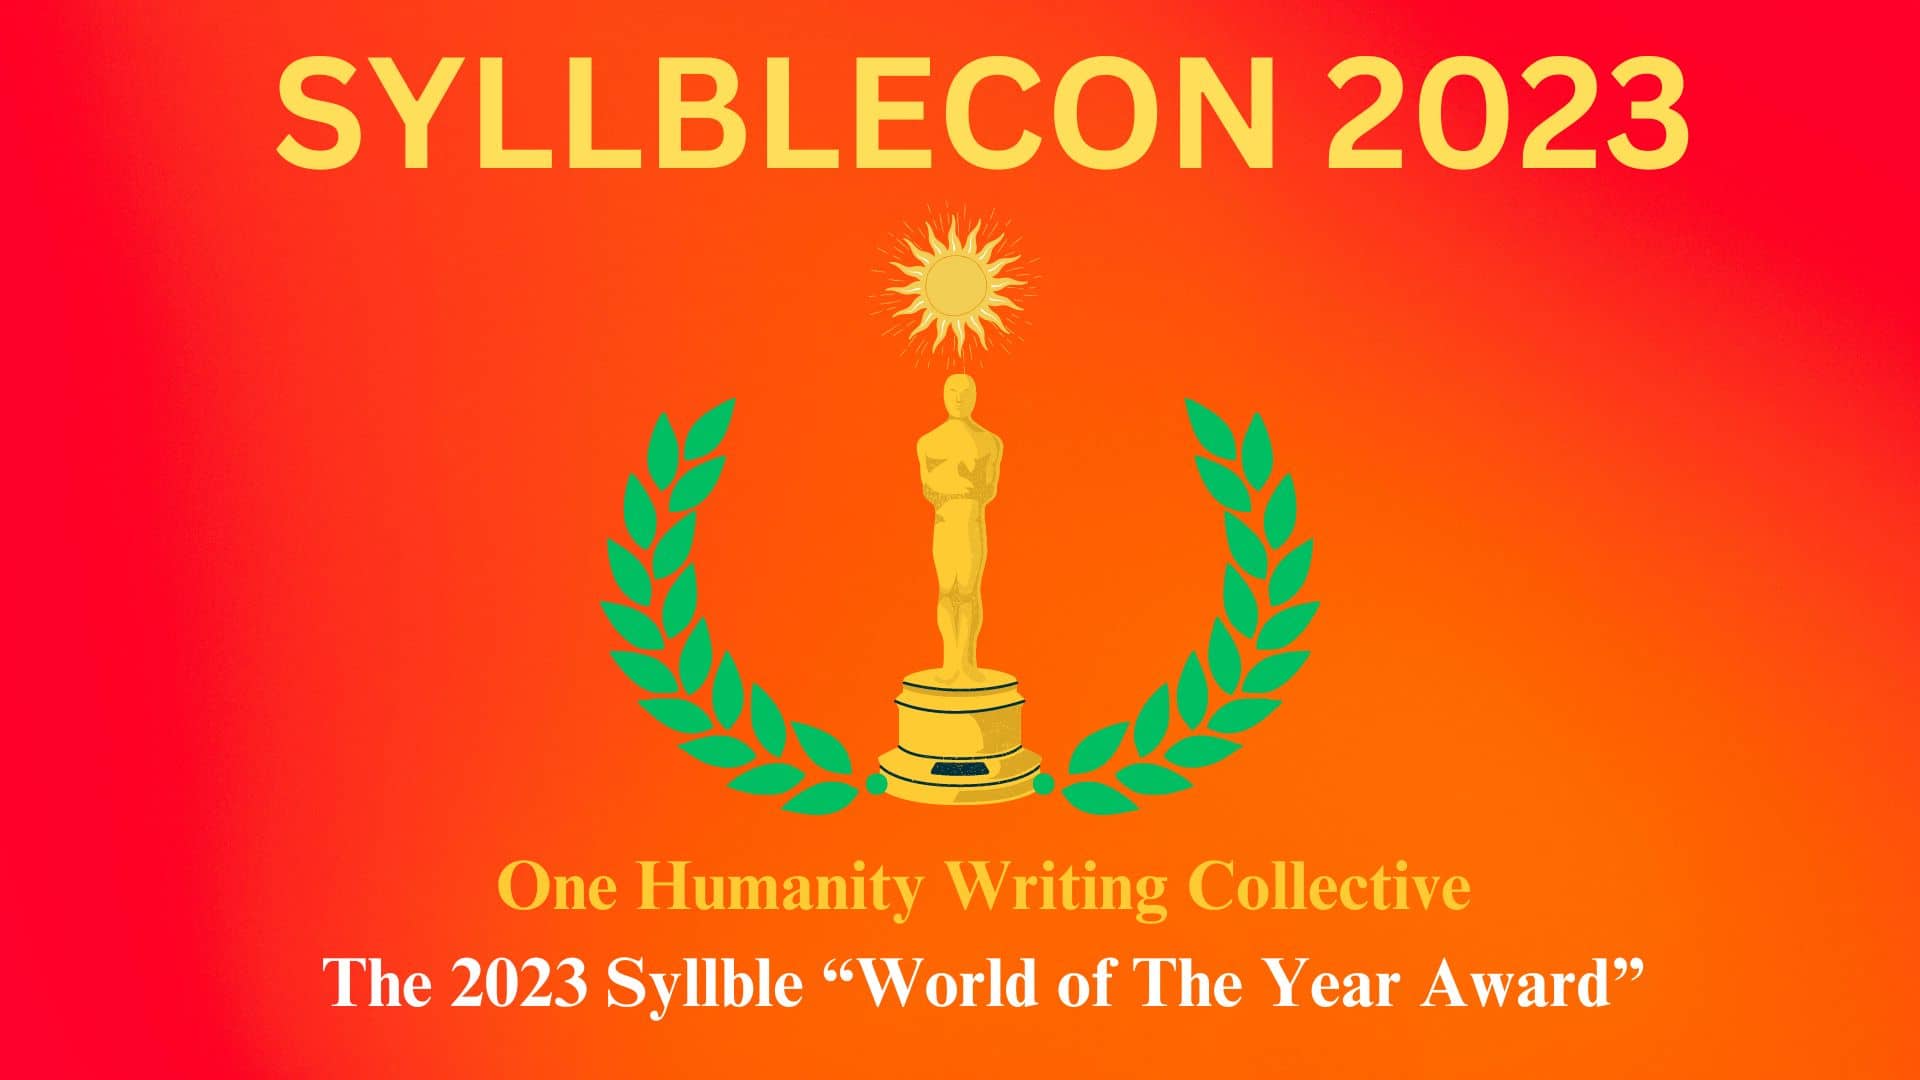 One Humanity Writing Collective Wins ‘World of the Year’ Award At Syllblecon 2023